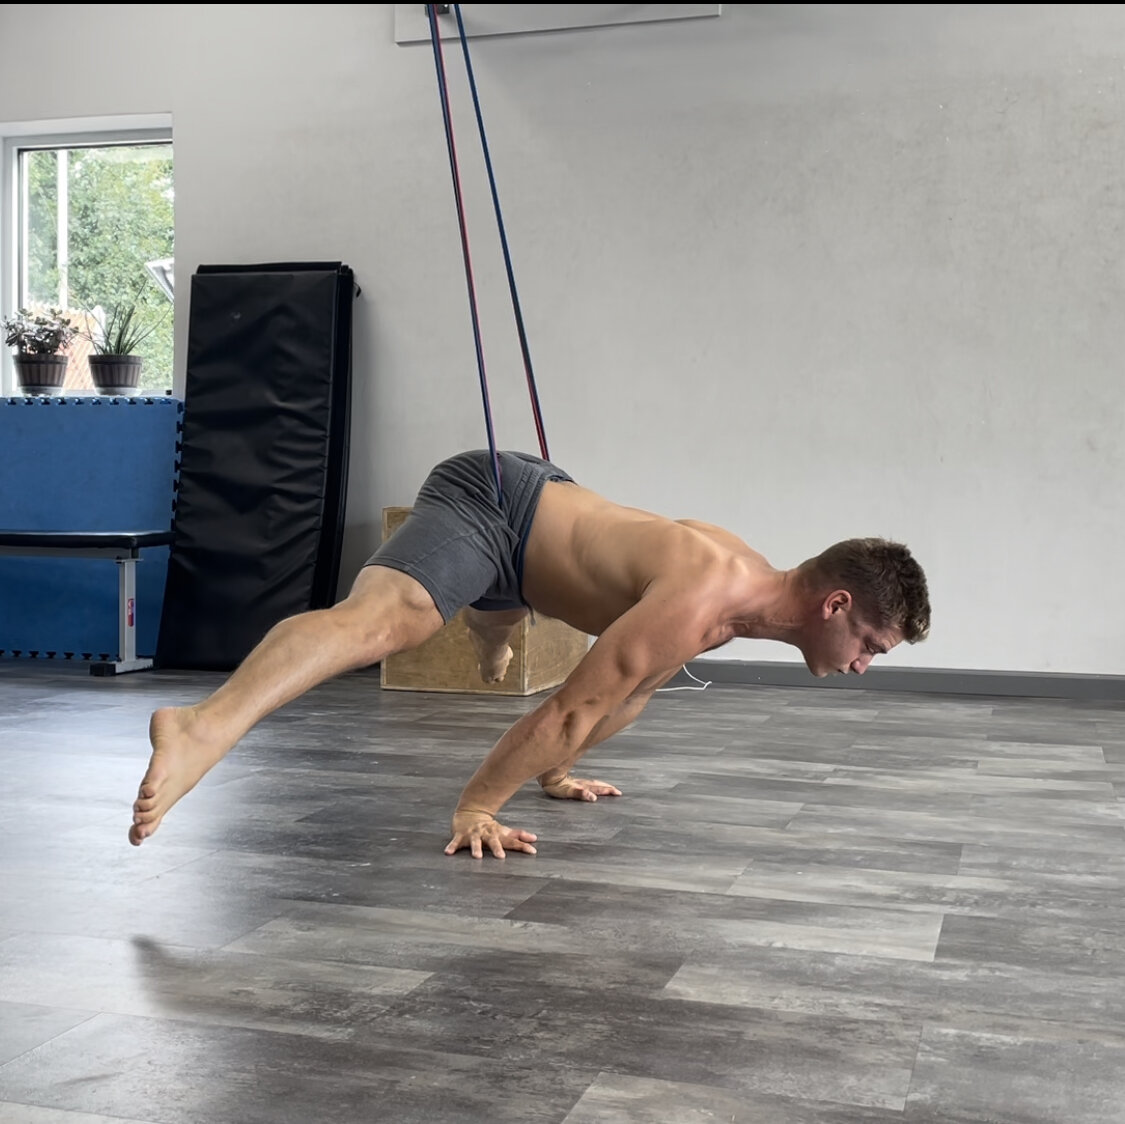 Training in line with values and interests has yielded physical and mental benefits. Here I practice the Straddle Planche.